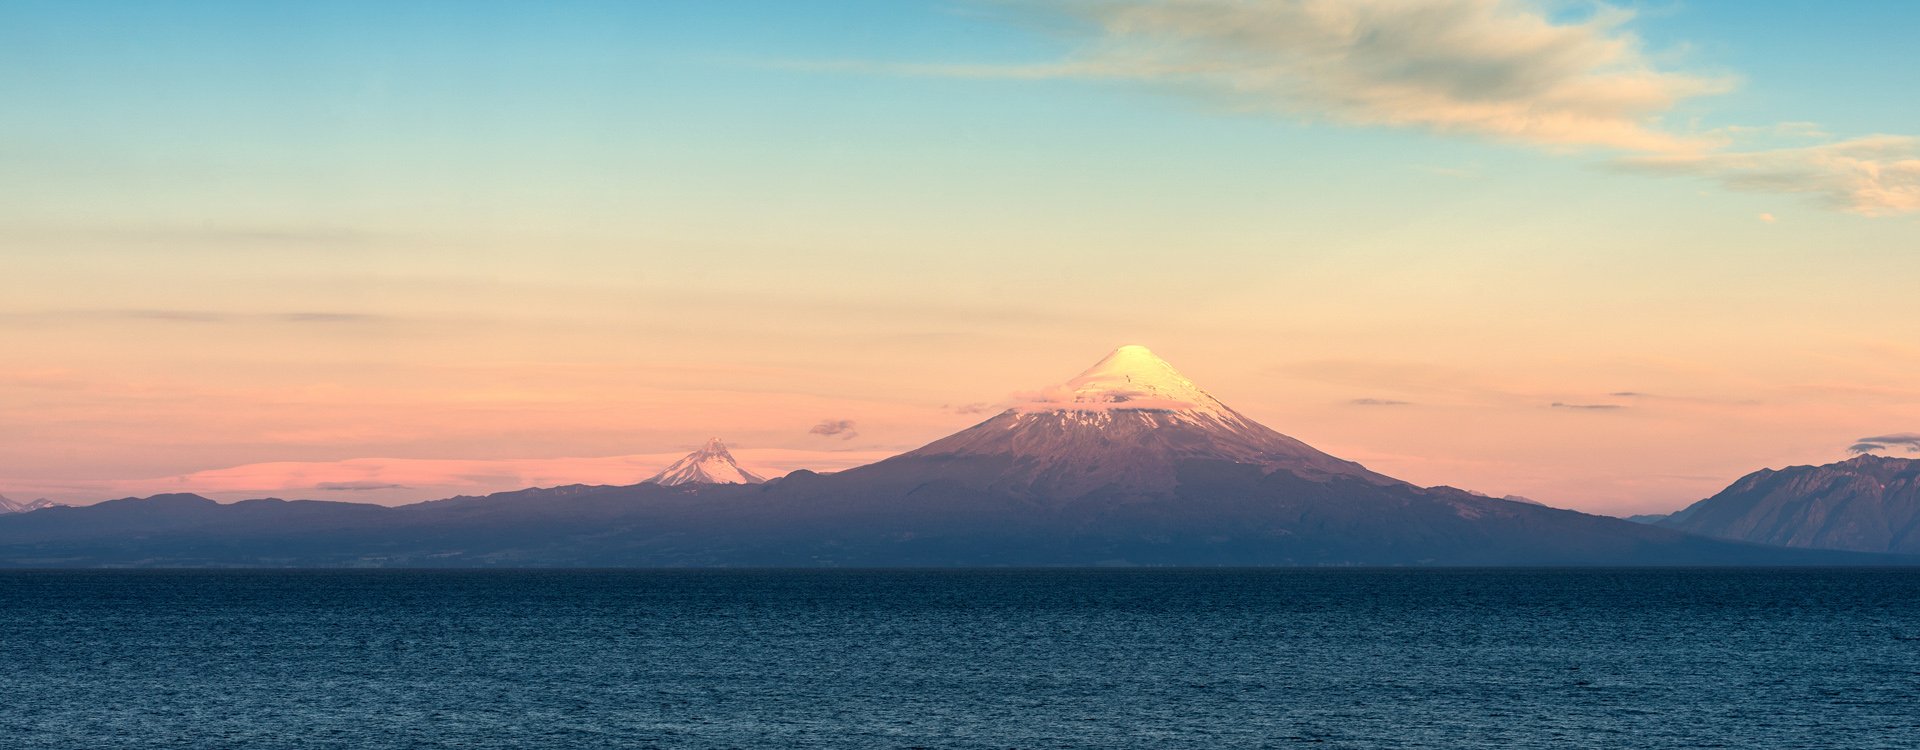 View of Osorno volcano, Puntigudo volcano and Llanquihue Lake in the Chilean Lake district at sunset